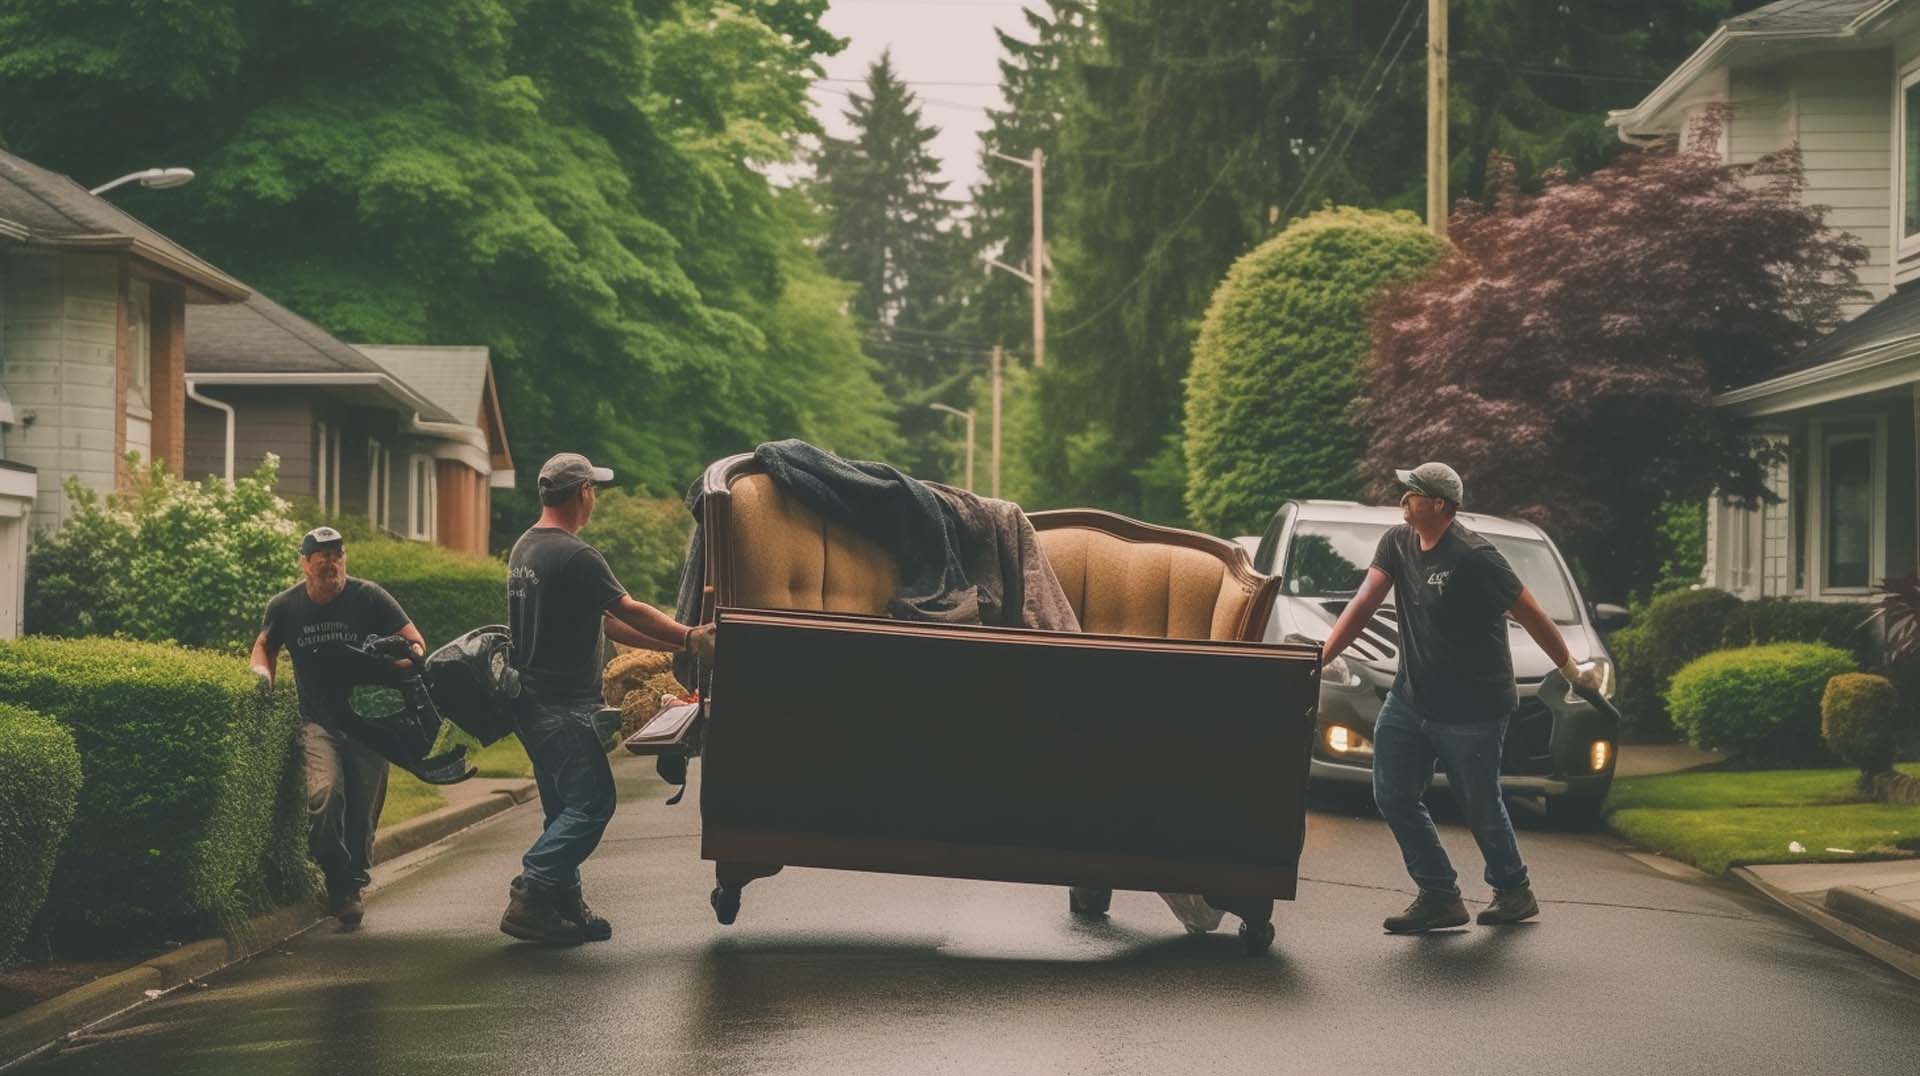 How to Find a Reputable Junk Removal Company in Surrey, British Columbia